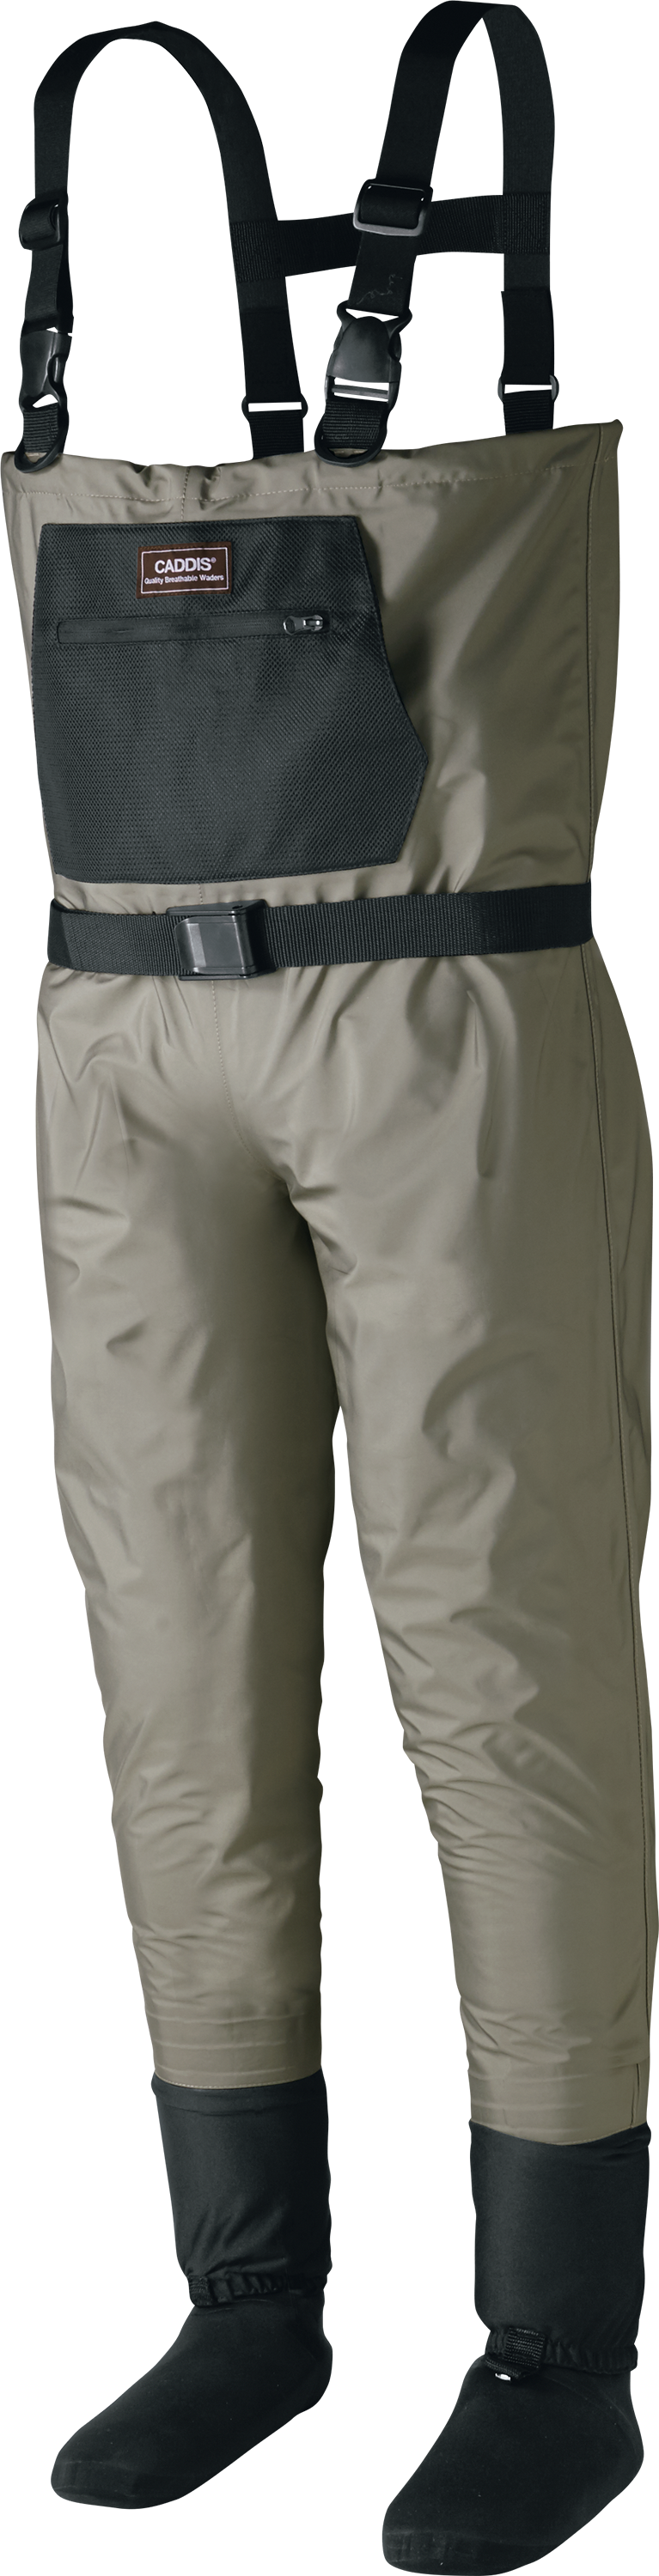 Caddis Breathable Stockingfoot Fishing Waders for Men - XL Stout